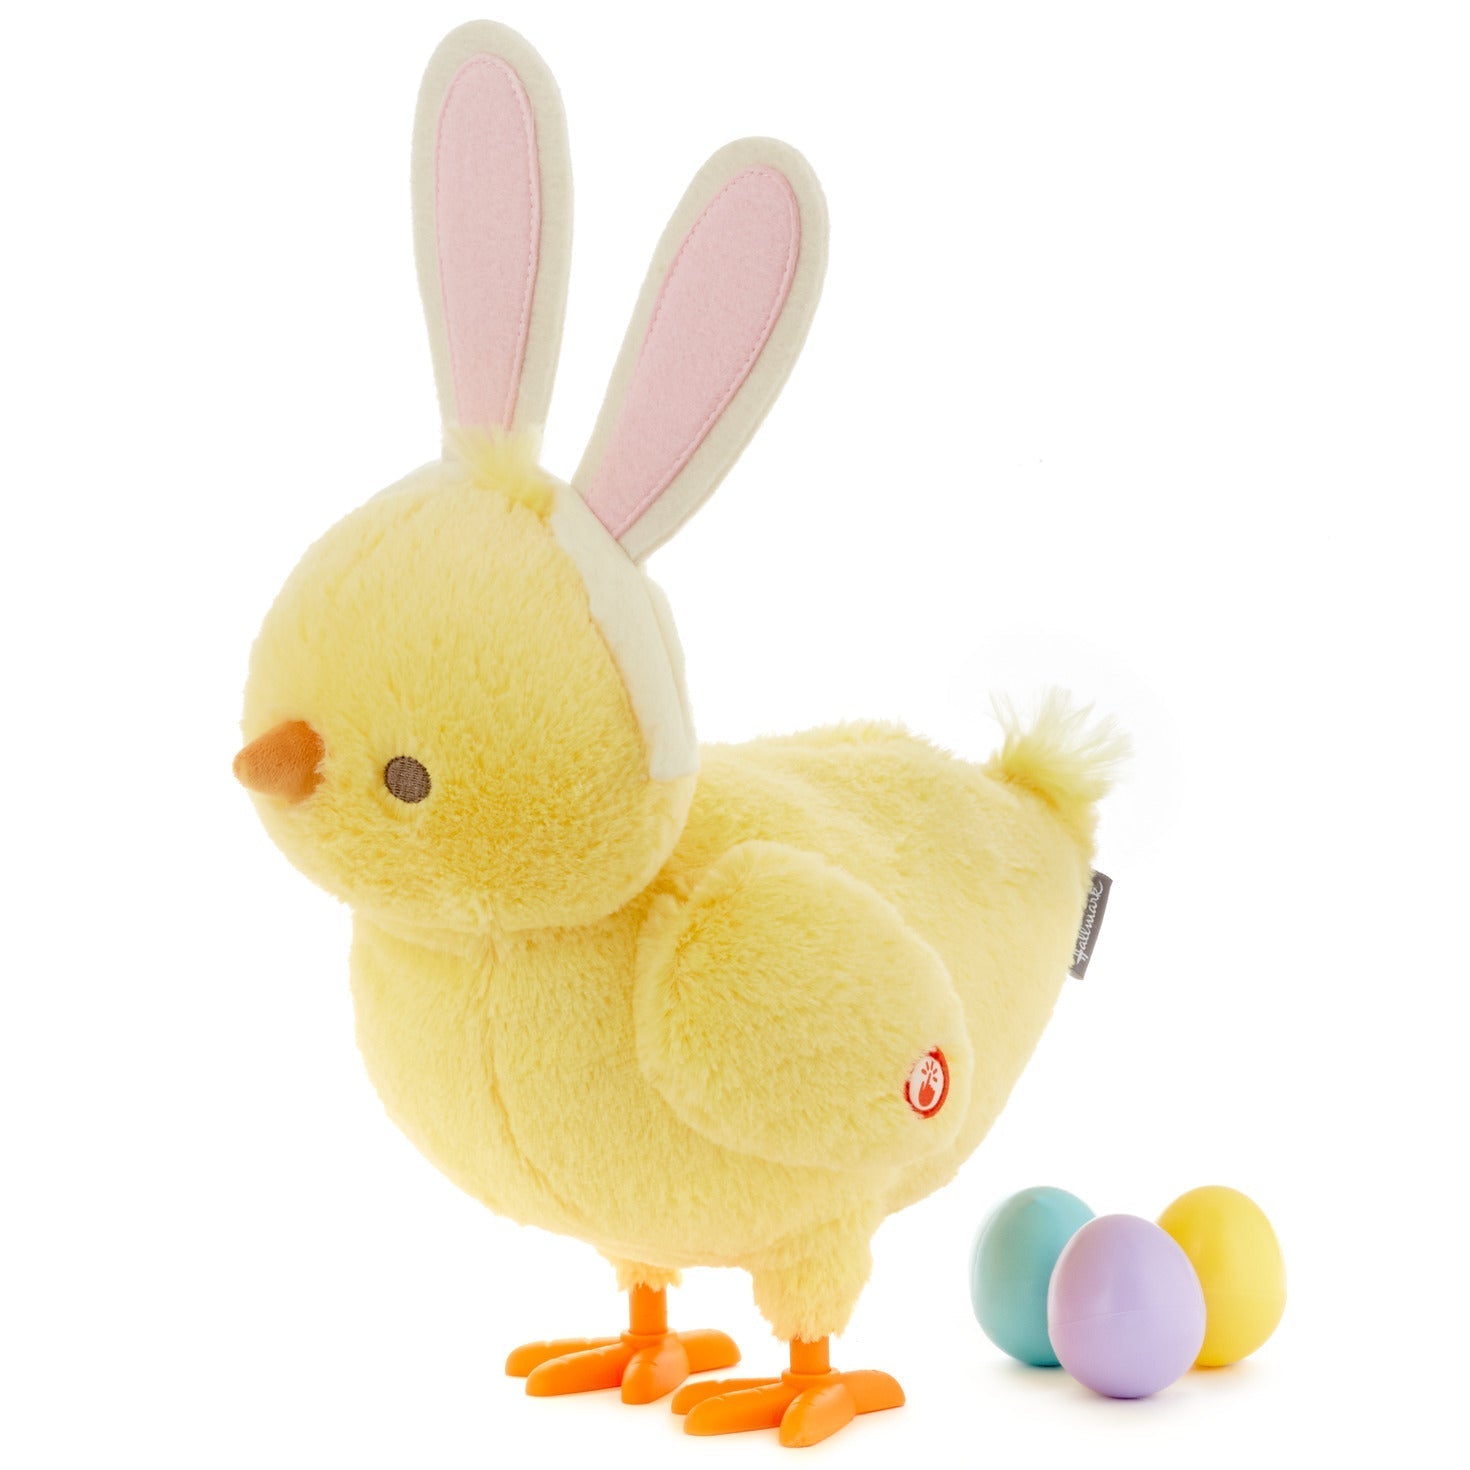 Hoppy Egg Laying Chick Singing Stuffed Animal With Motion 13"H